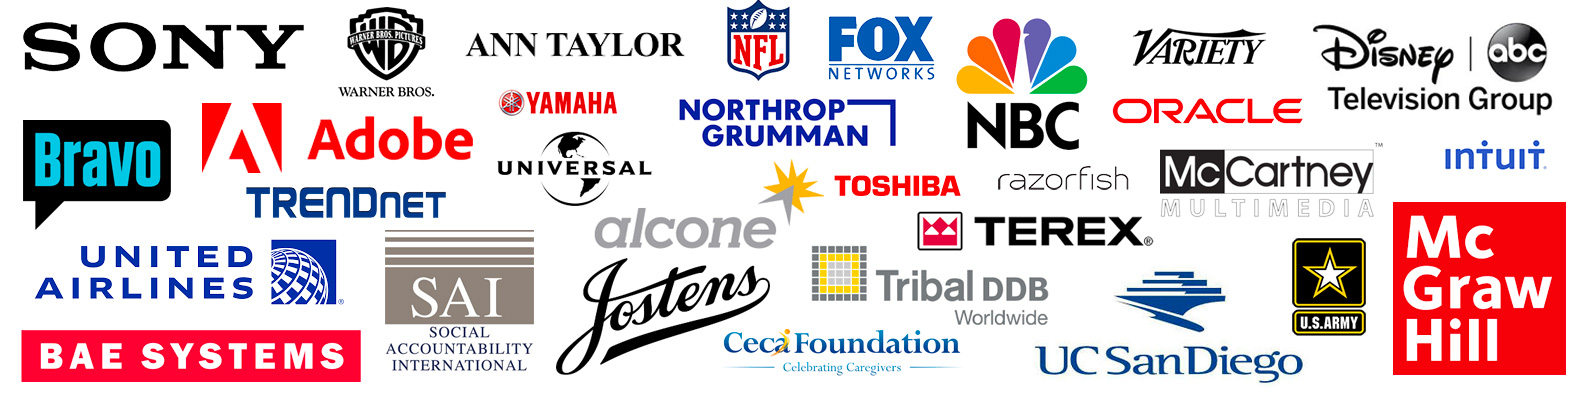 We have worked with numerous Fortune 500 companies such as: Adobe, BAE Systems, McGraw-Hill, Sony, NBC Agency, Fox, Universal. Disney and many more.